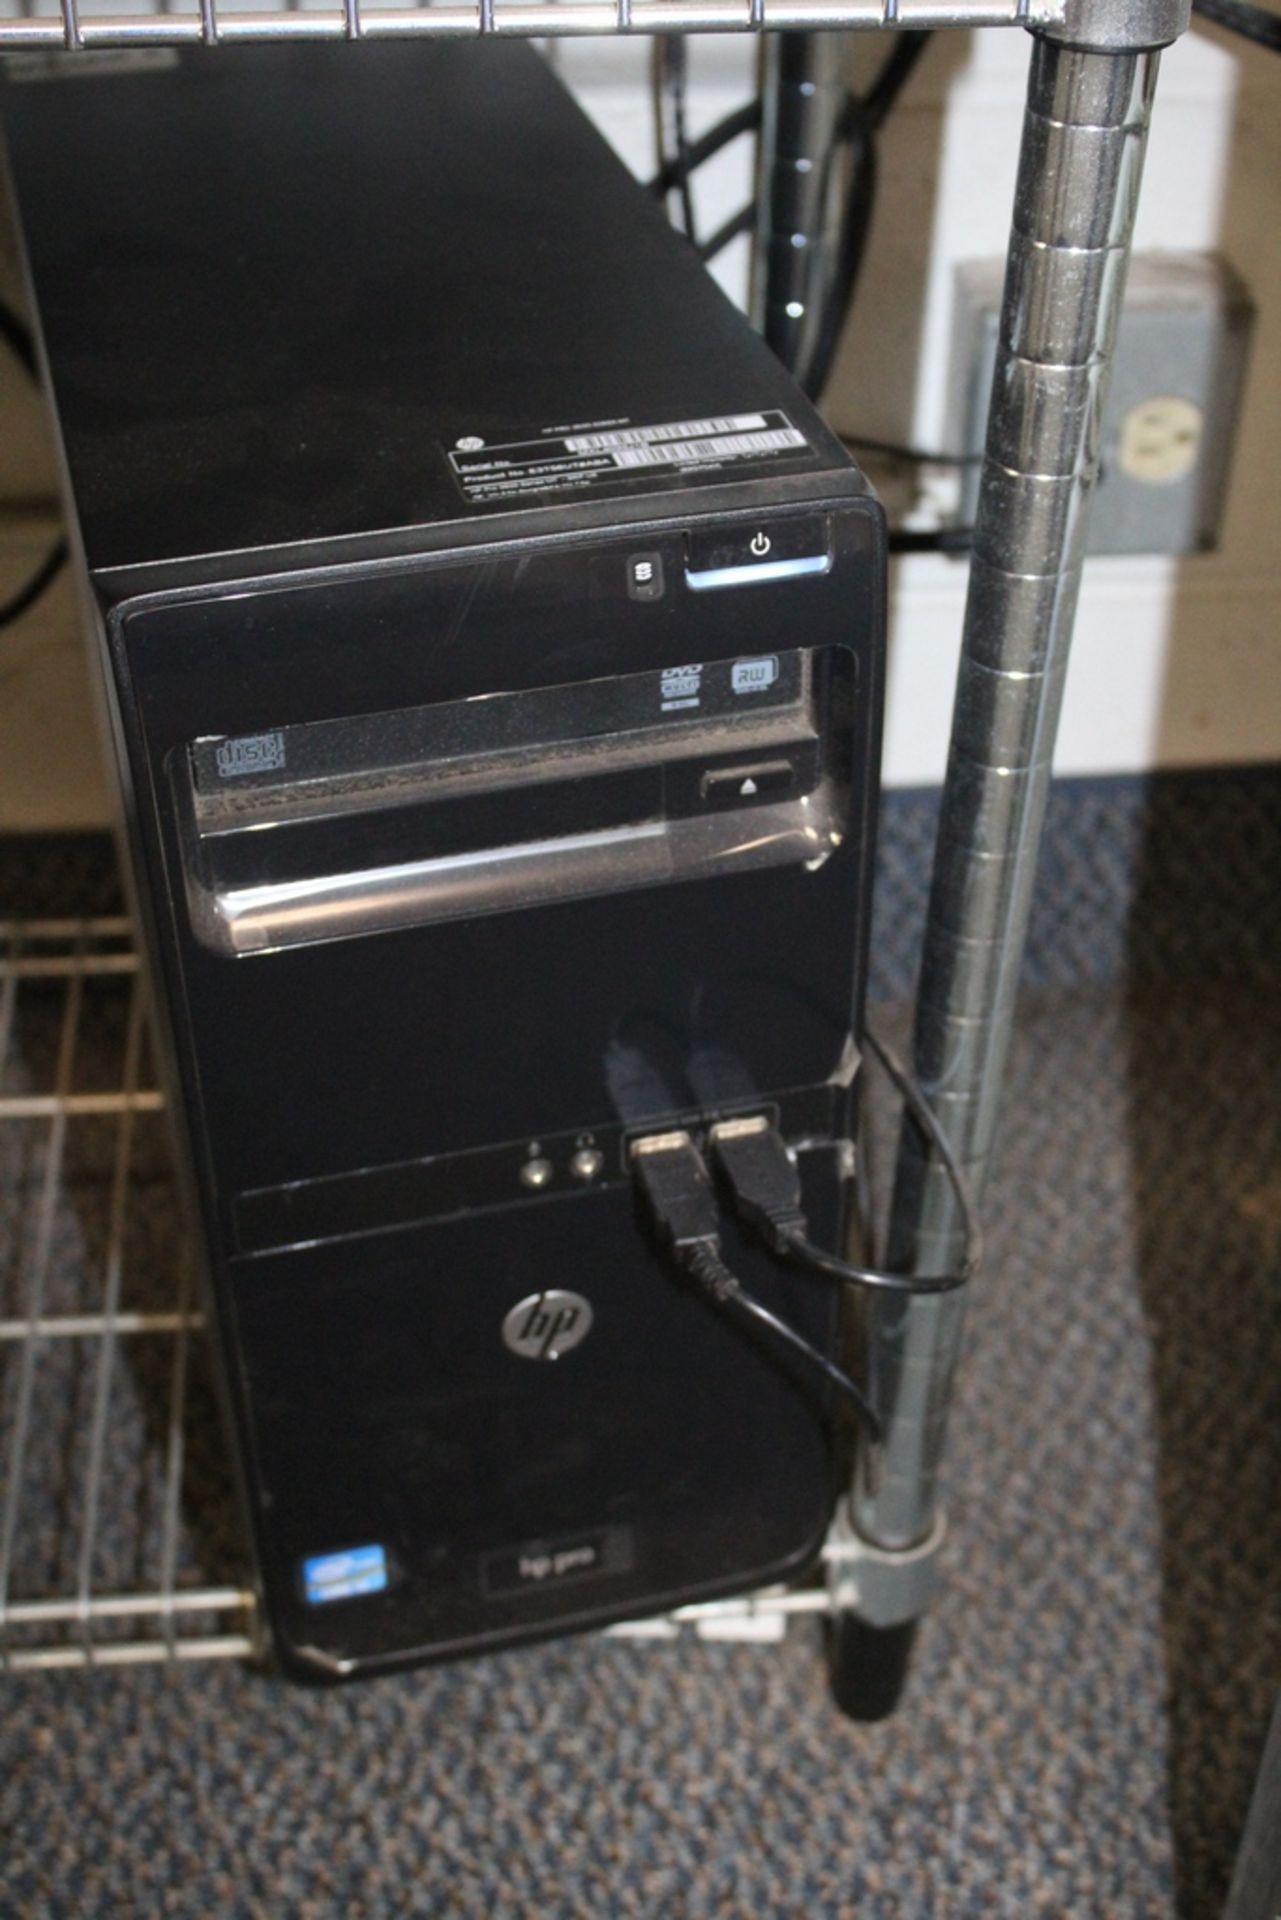 HP 3500 DESKTOP COMPUTER WITH ACER FLATSCREEN MONITOR, KEYBOARD AND MOUSE - Image 2 of 2